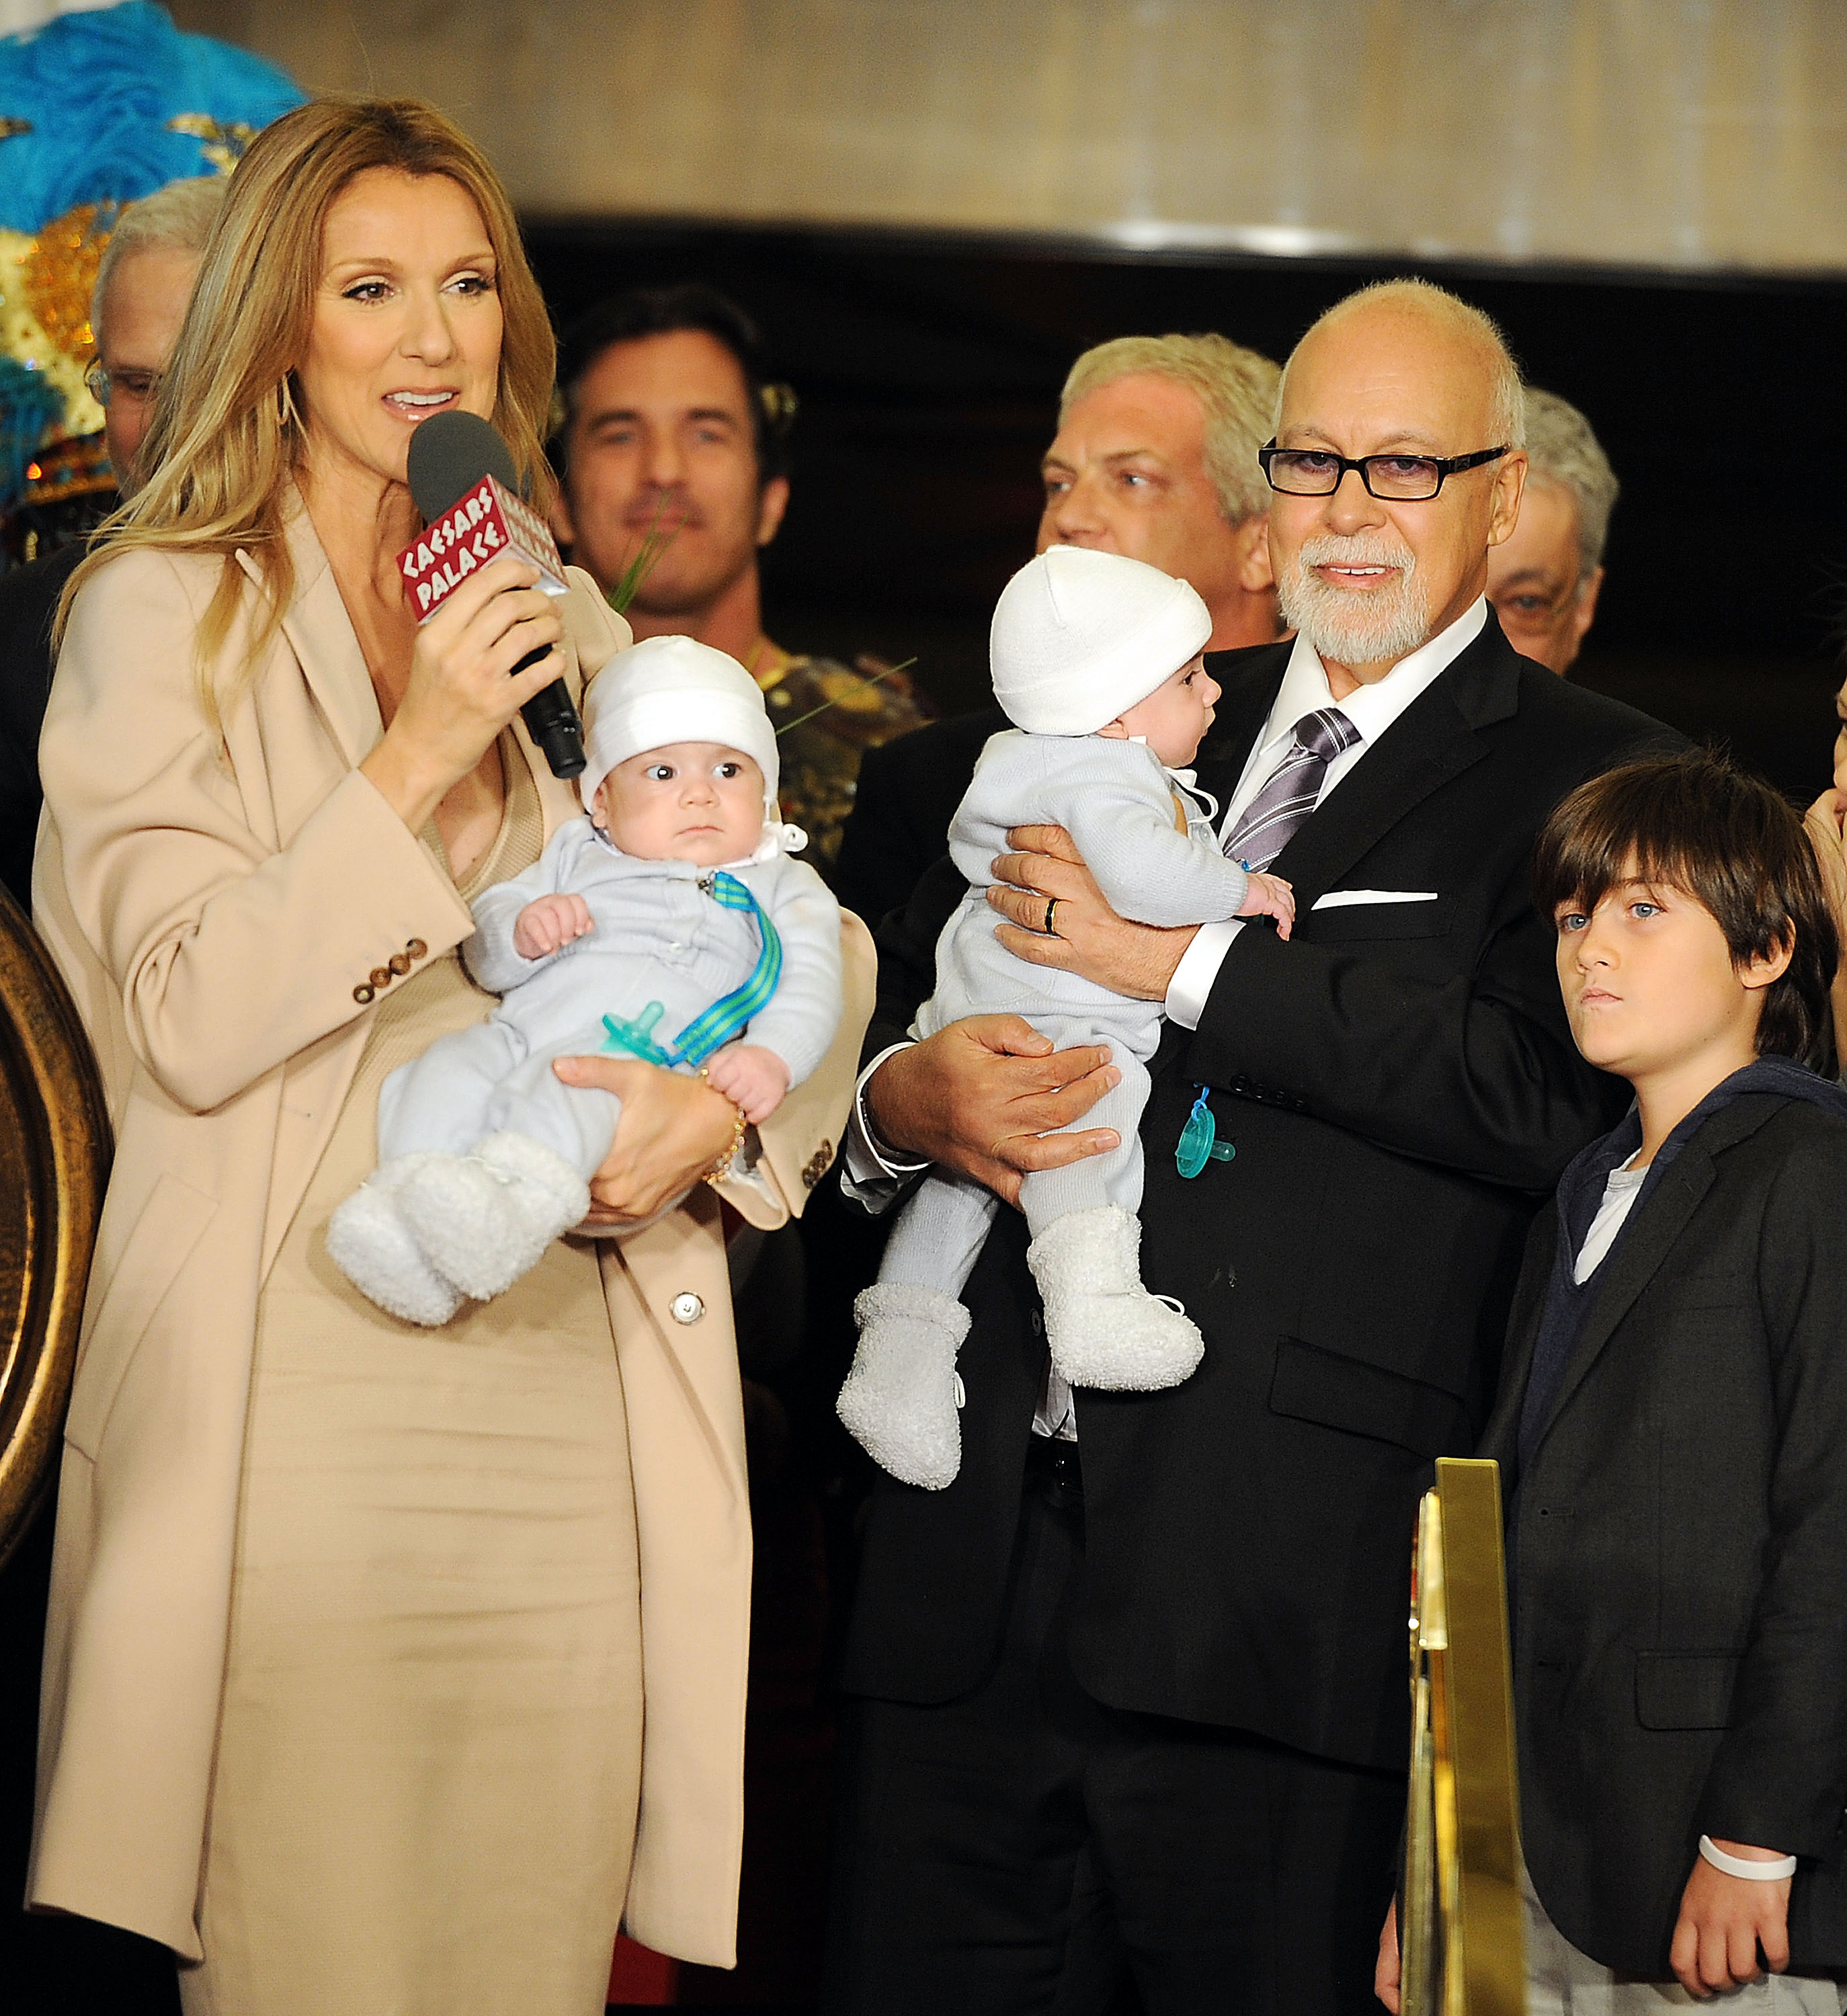 Celine Dion, Nelson Dion Angelil, Eddy Dion Angelil, Rene Angelil and Rene-Charles Dion Angelil arrive at Caesars Palace on February 16, 2011 in Las Vegas, Nevada. | Source: Getty Images